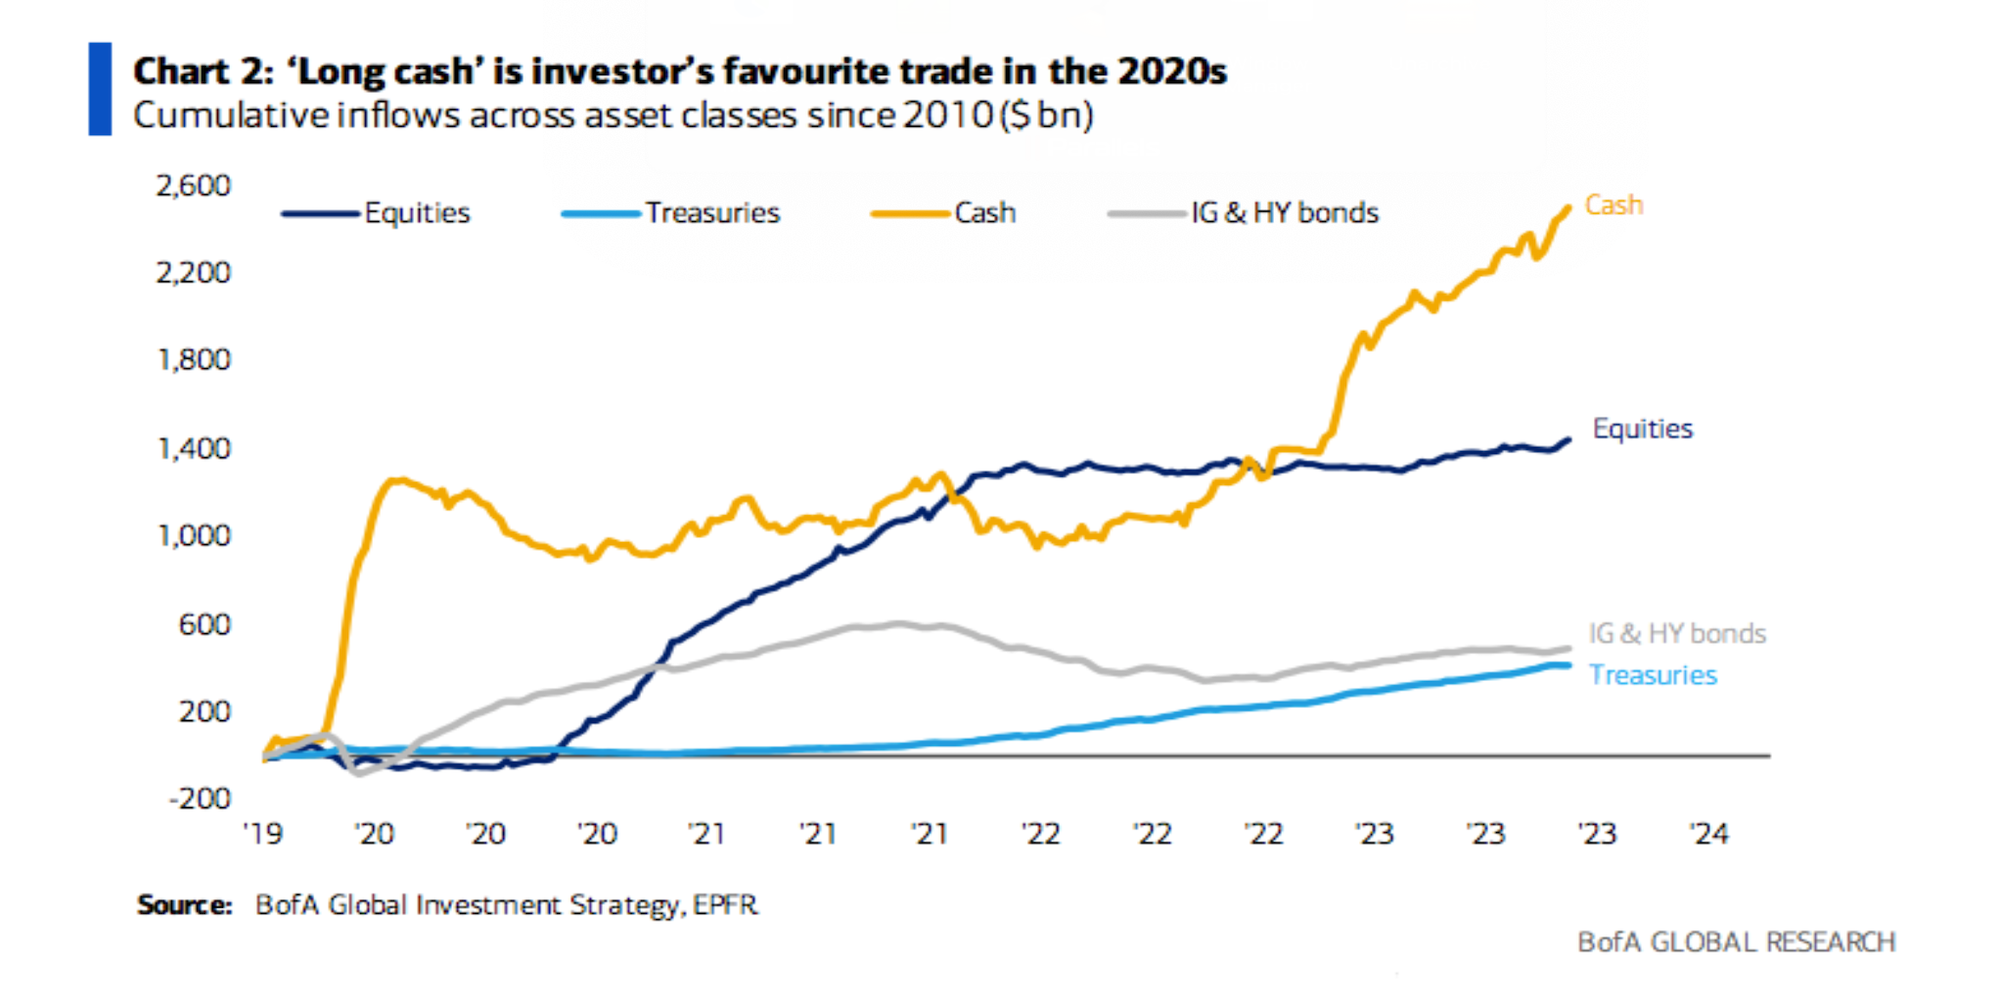 Long cash continues to be flows story of the 2020s.  $1.2 trillion flowed into cash funds in 2023; more than Treasurys ($186b), high grade credit ($145b), and global equities ($143b) combined.  Ostensibly, that’s dry powder (sideline cash) that can be deployed into assets once various coasts are clear - 